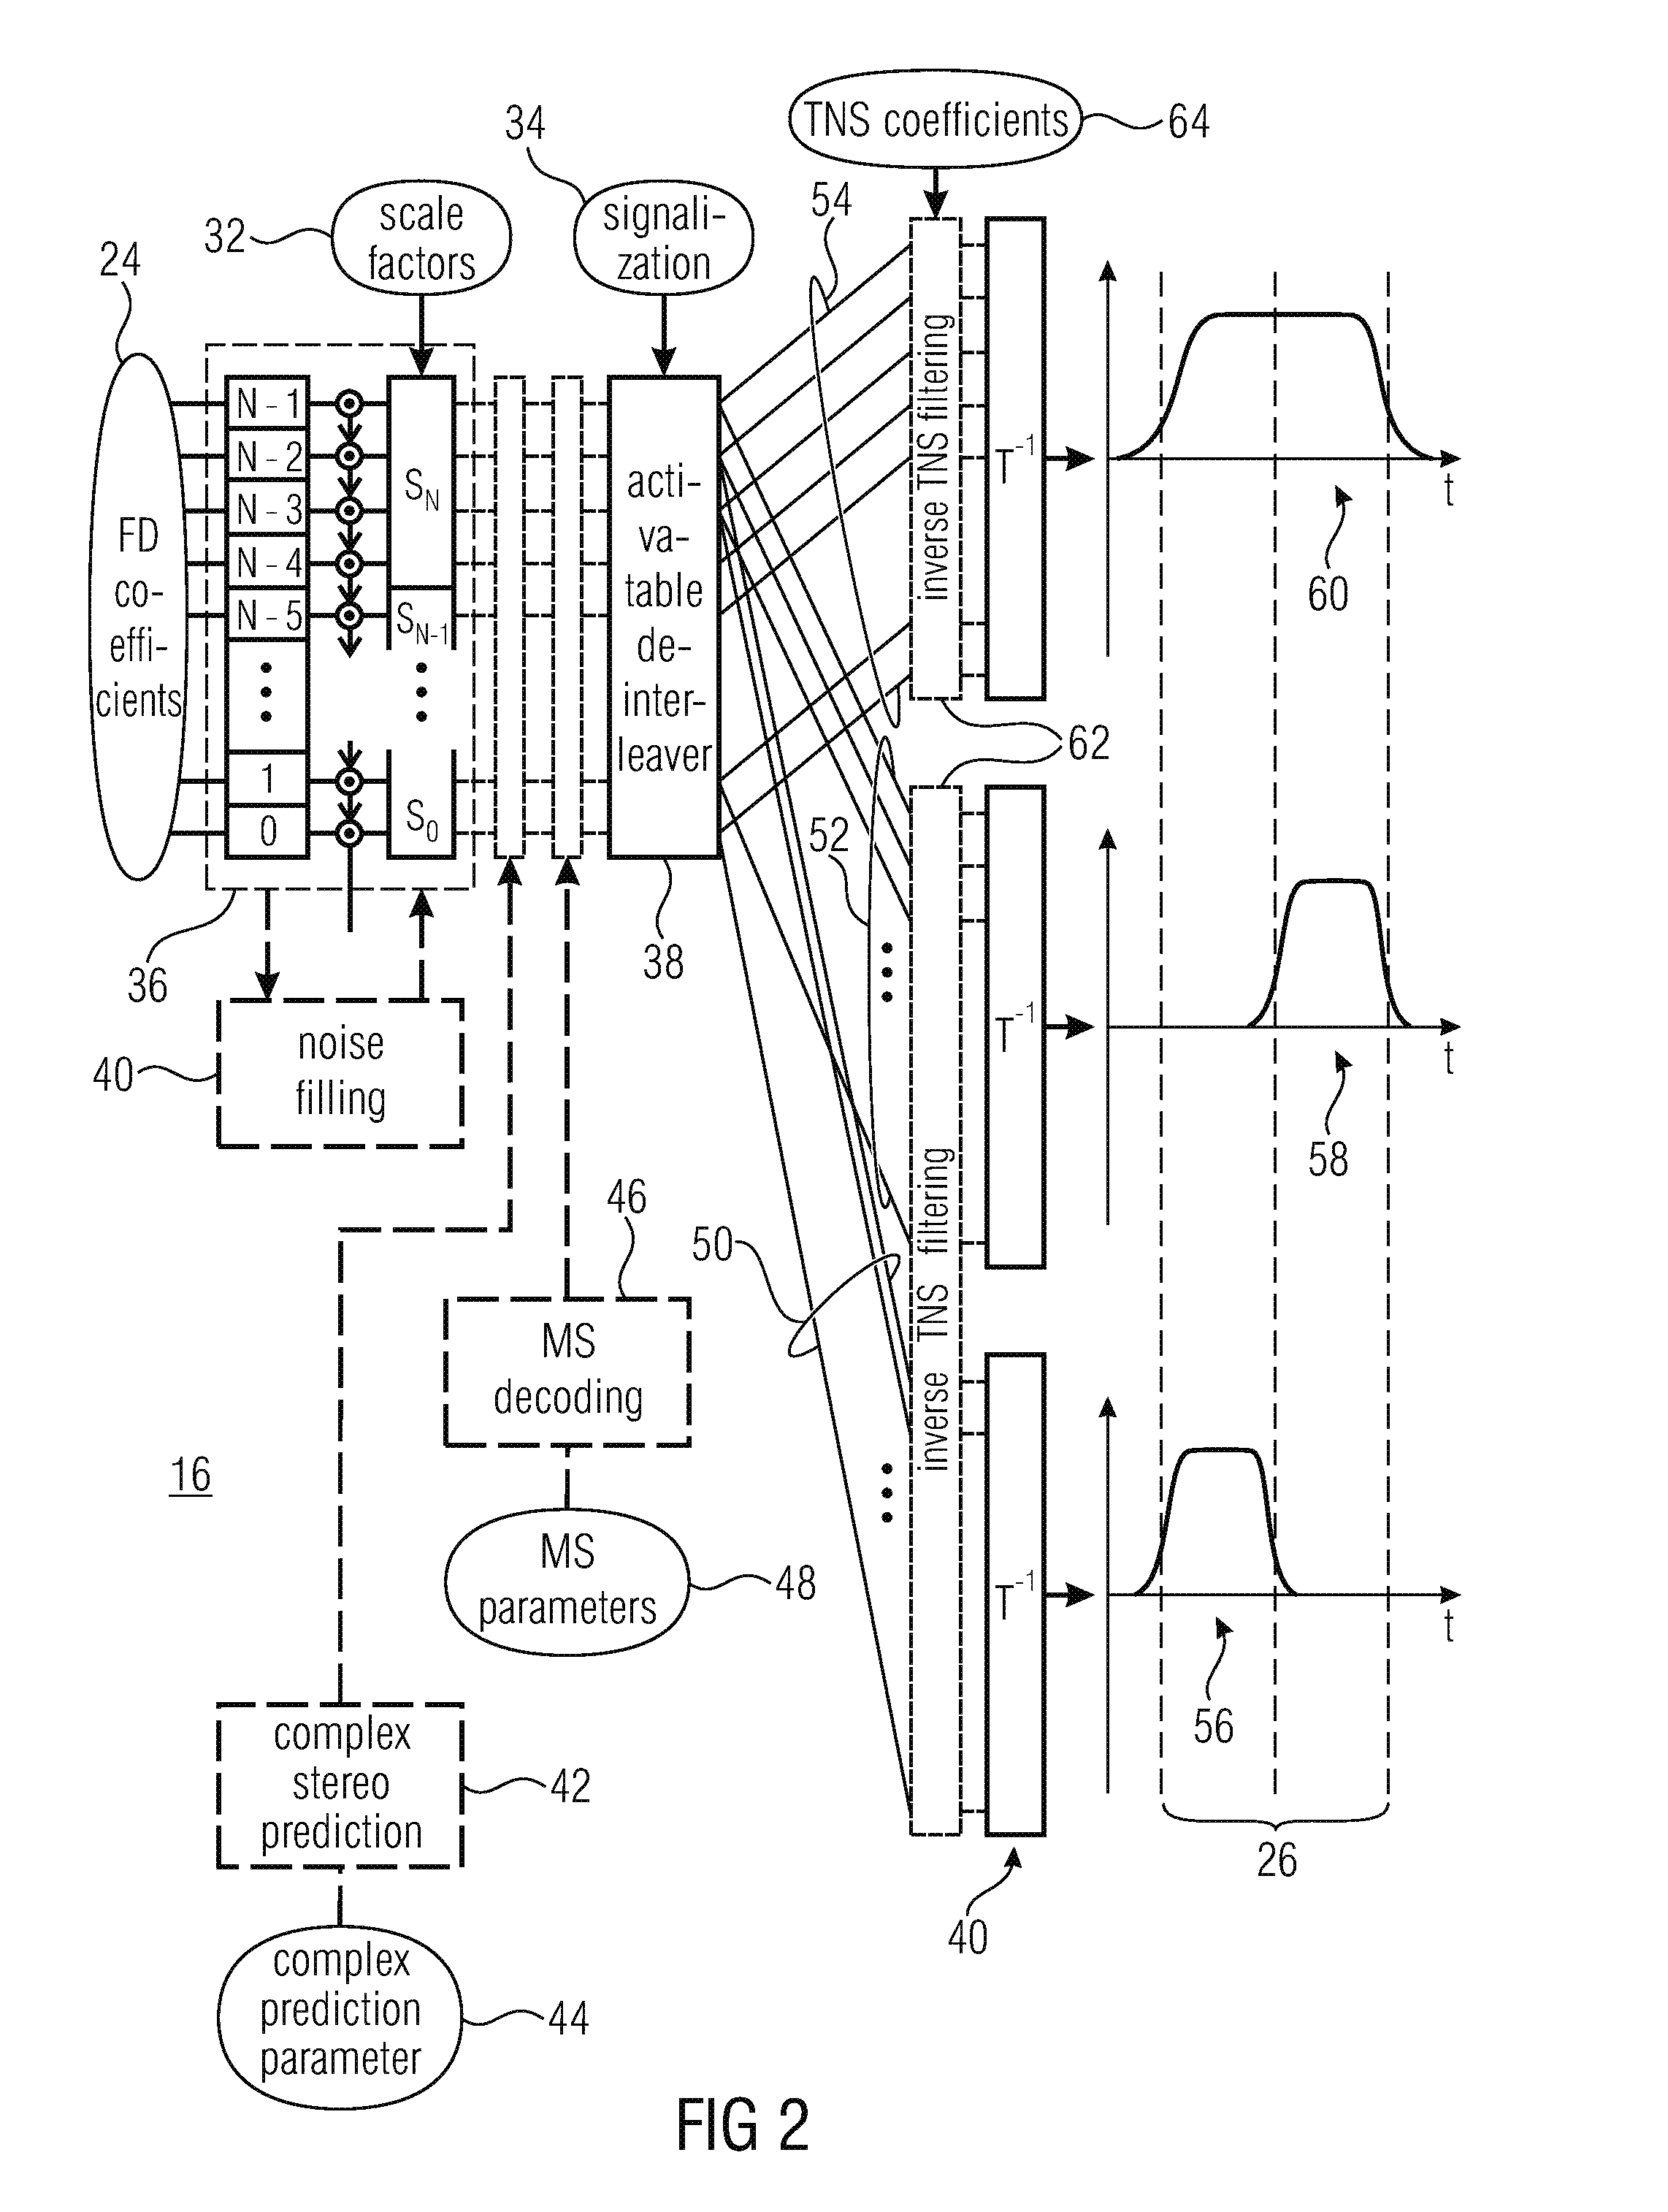 Frequency-domain audio coding supporting transform length switching